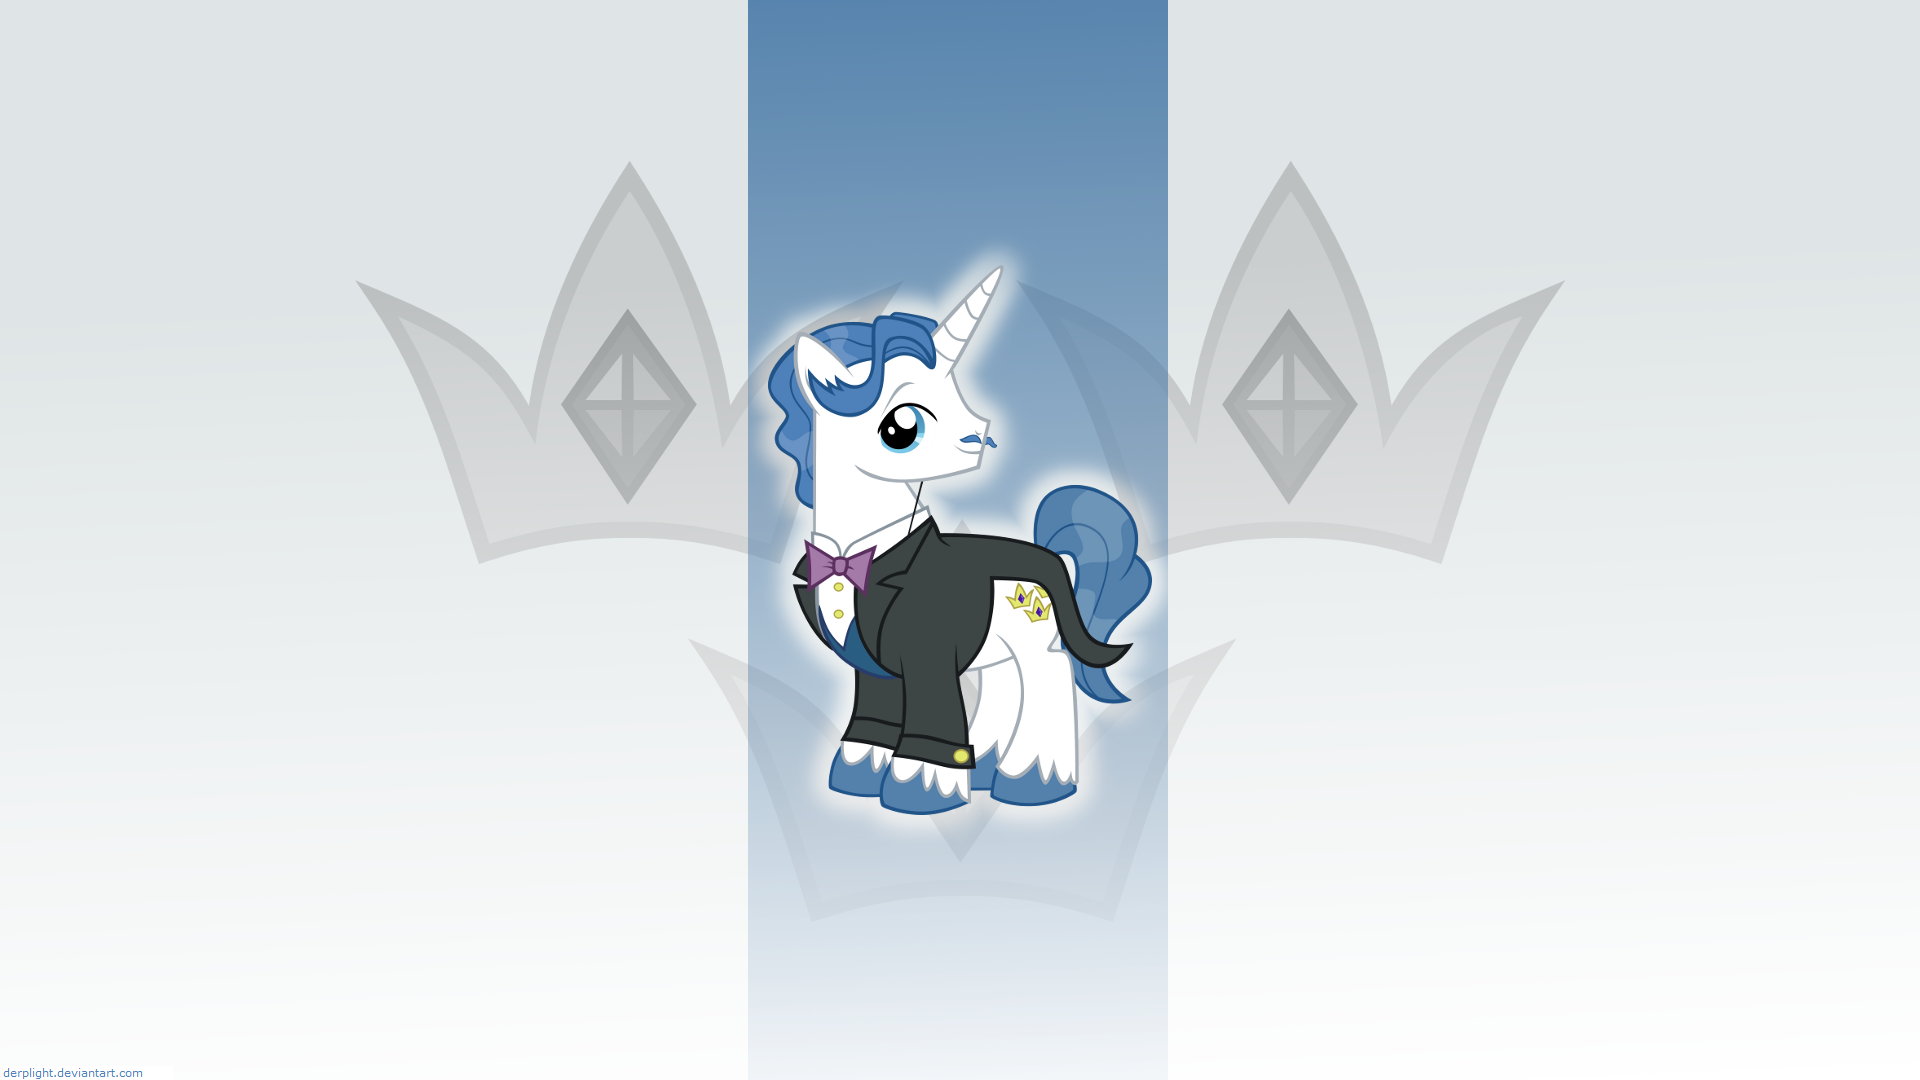 Fancypants Wallpaper by DerpLight, elegantmisreader and The-Smiling-Pony